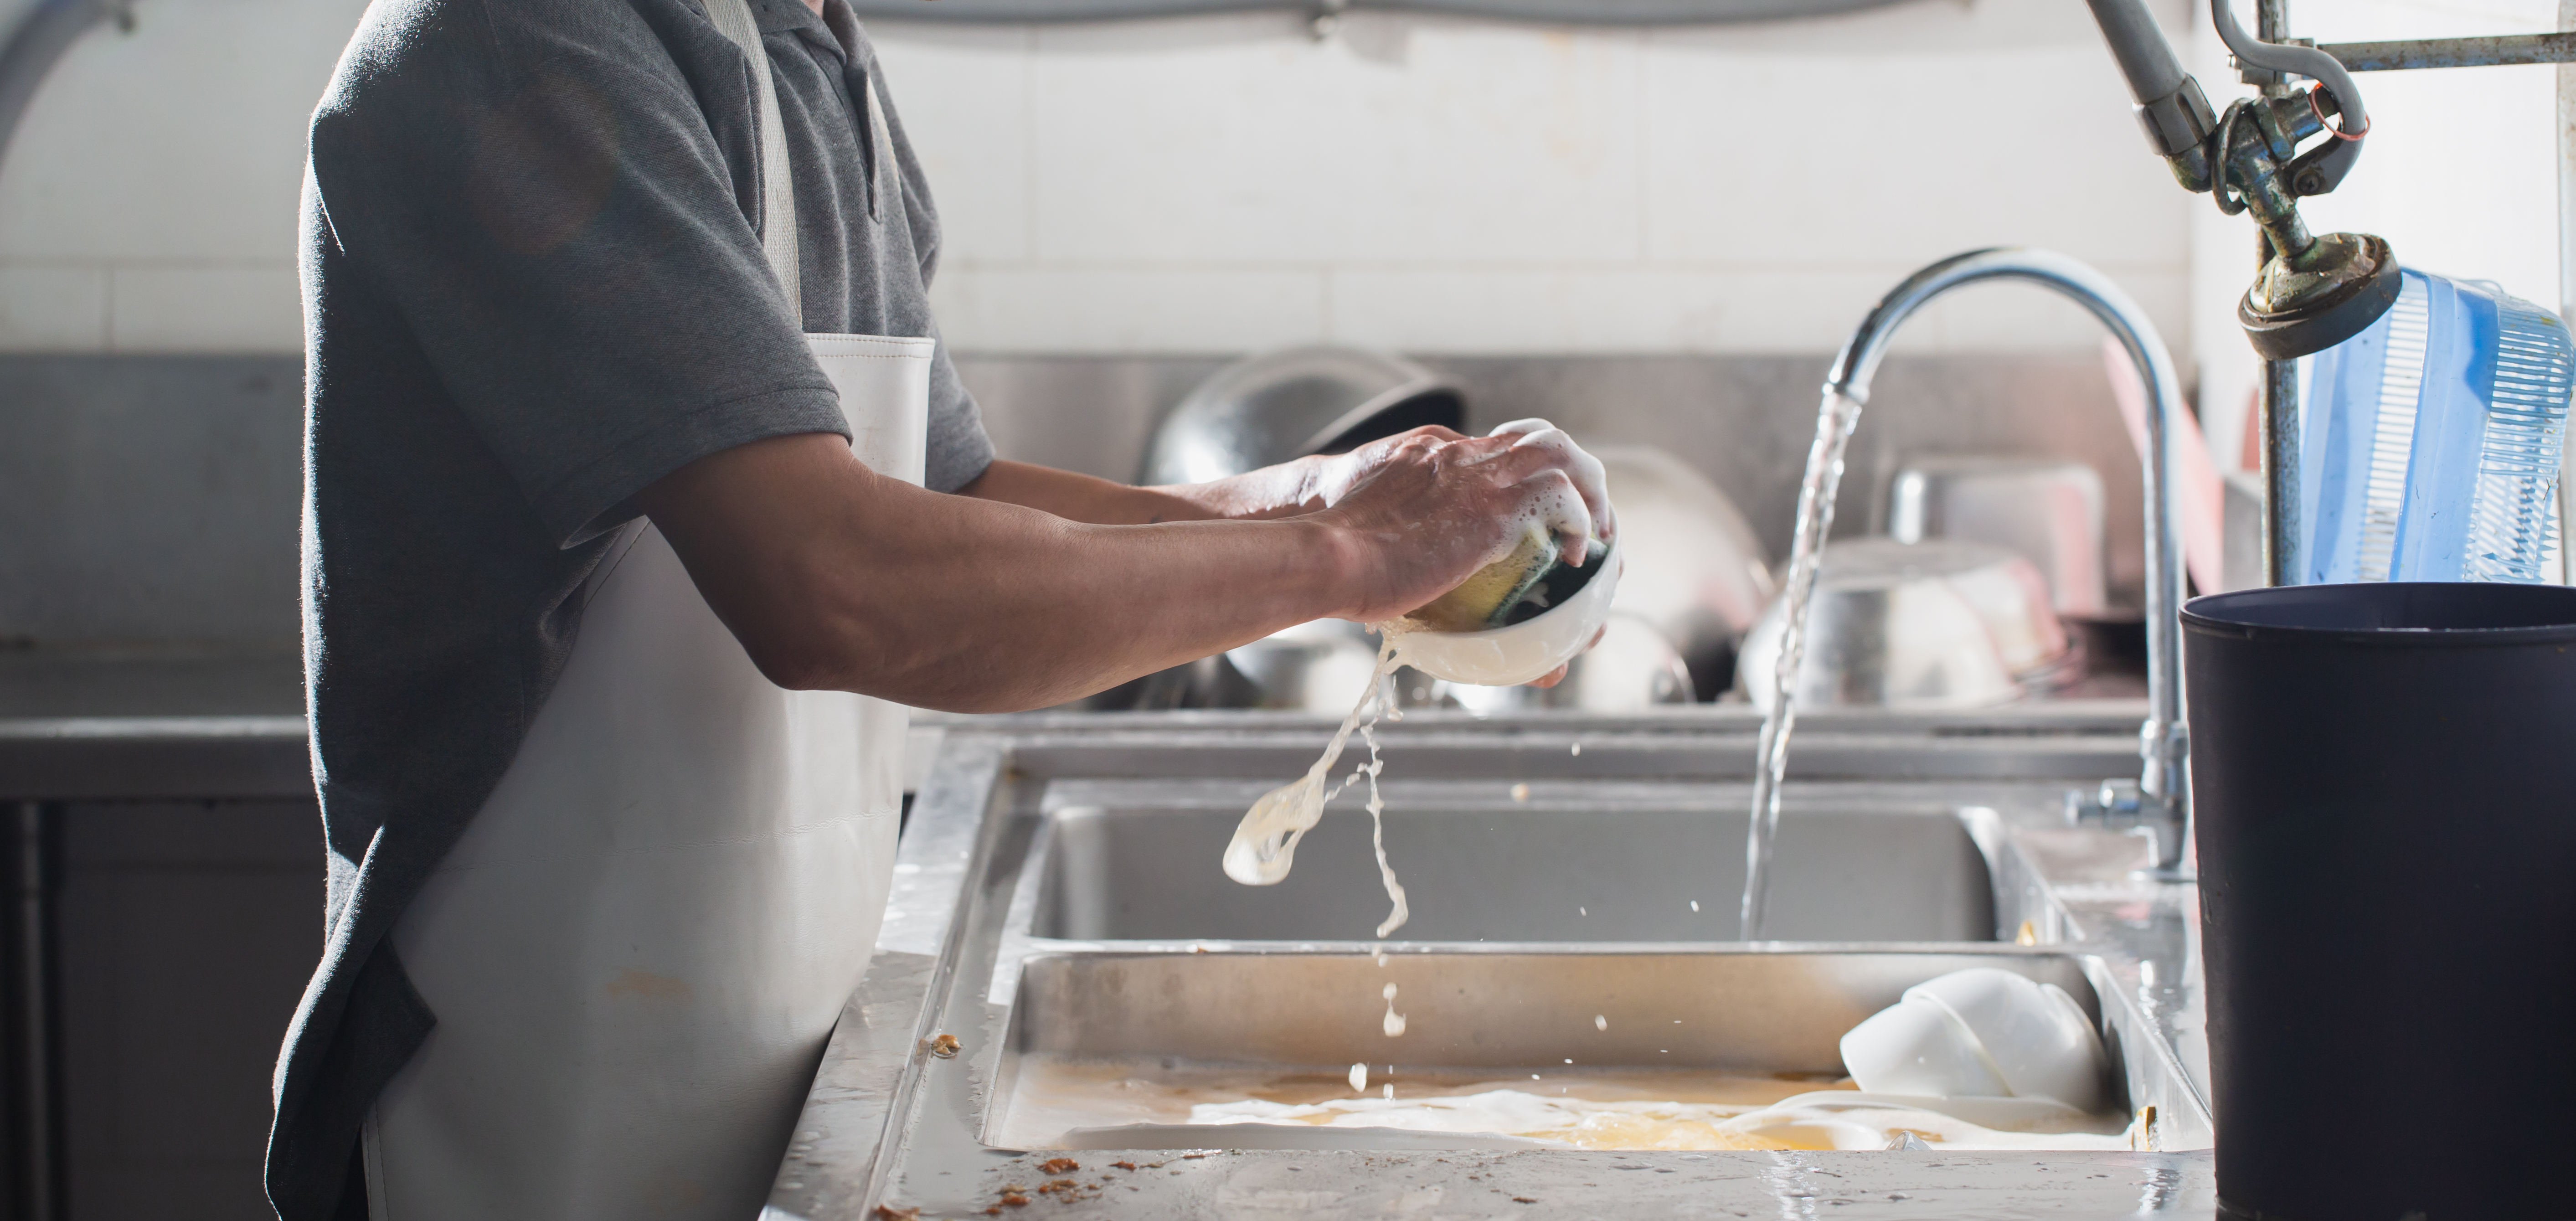 Dishes | Source: Shutterstock